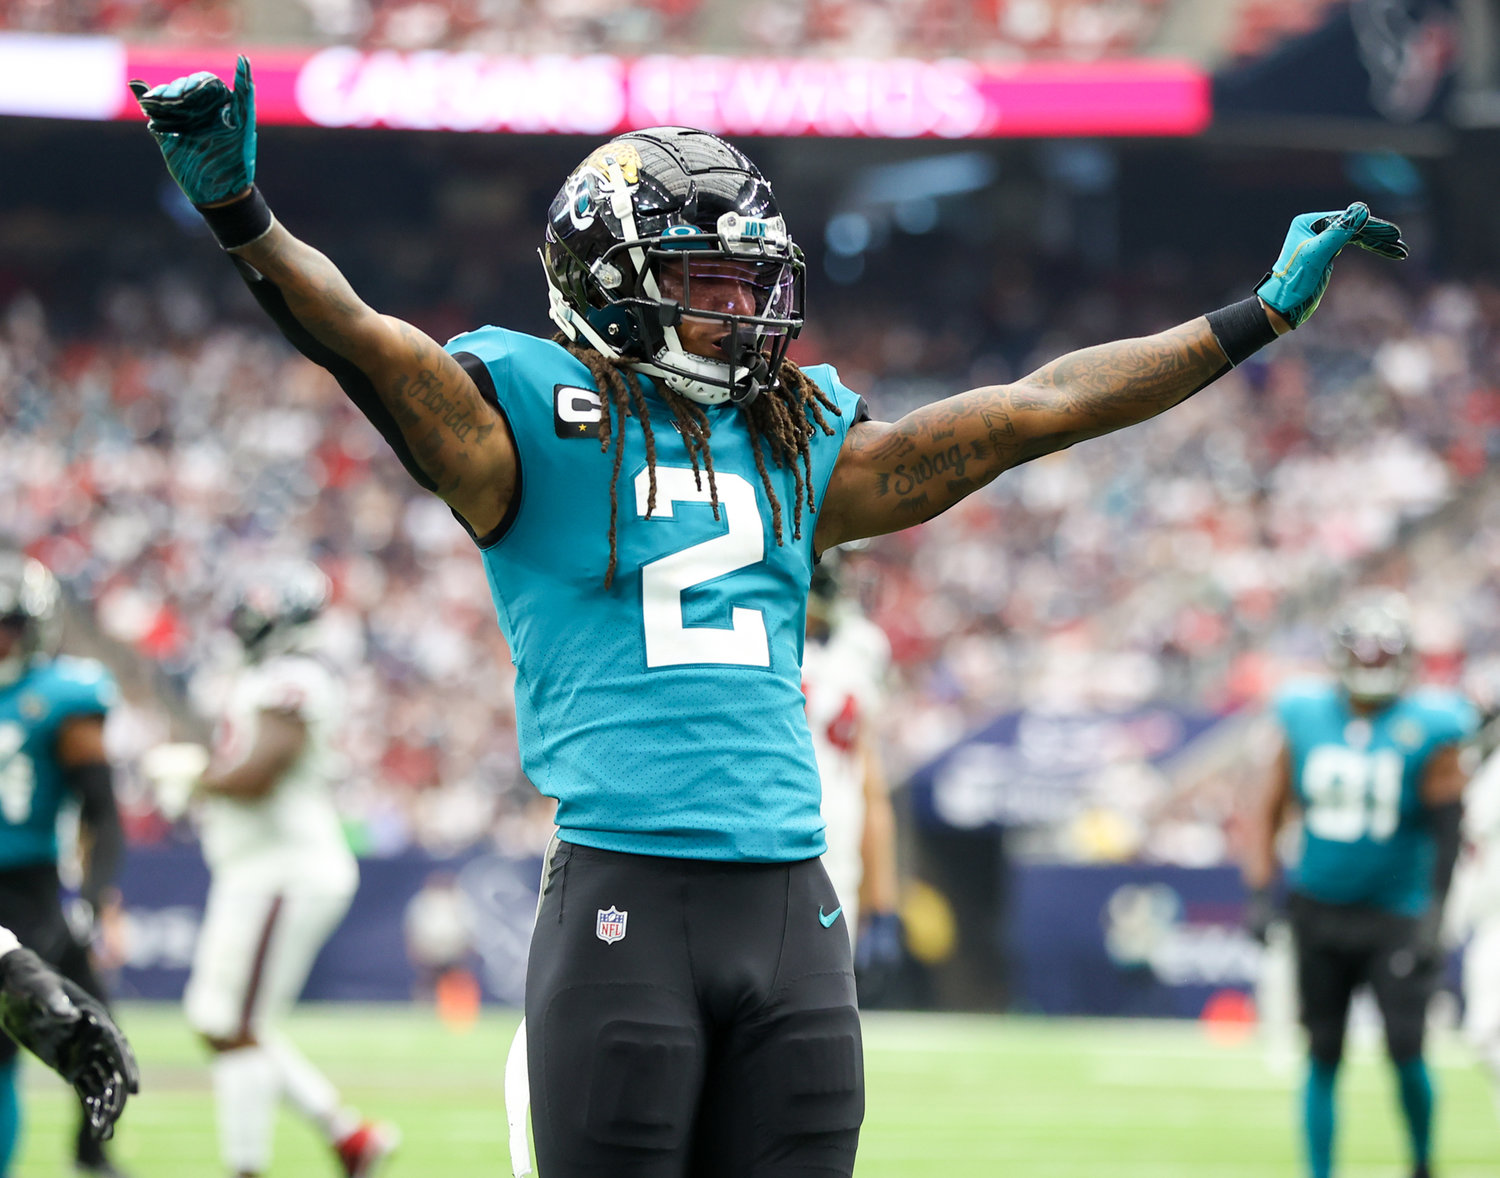 Jacksonville Jaguars defensive back Rayshawn Jenkins (2) gestures to Texans fans after a Texans pass falls incomplete in the end zone during the second half of an NFL game between the Houston Texans and the Jacksonville Jaguars on September 12, 2021 in Houston, Texas.